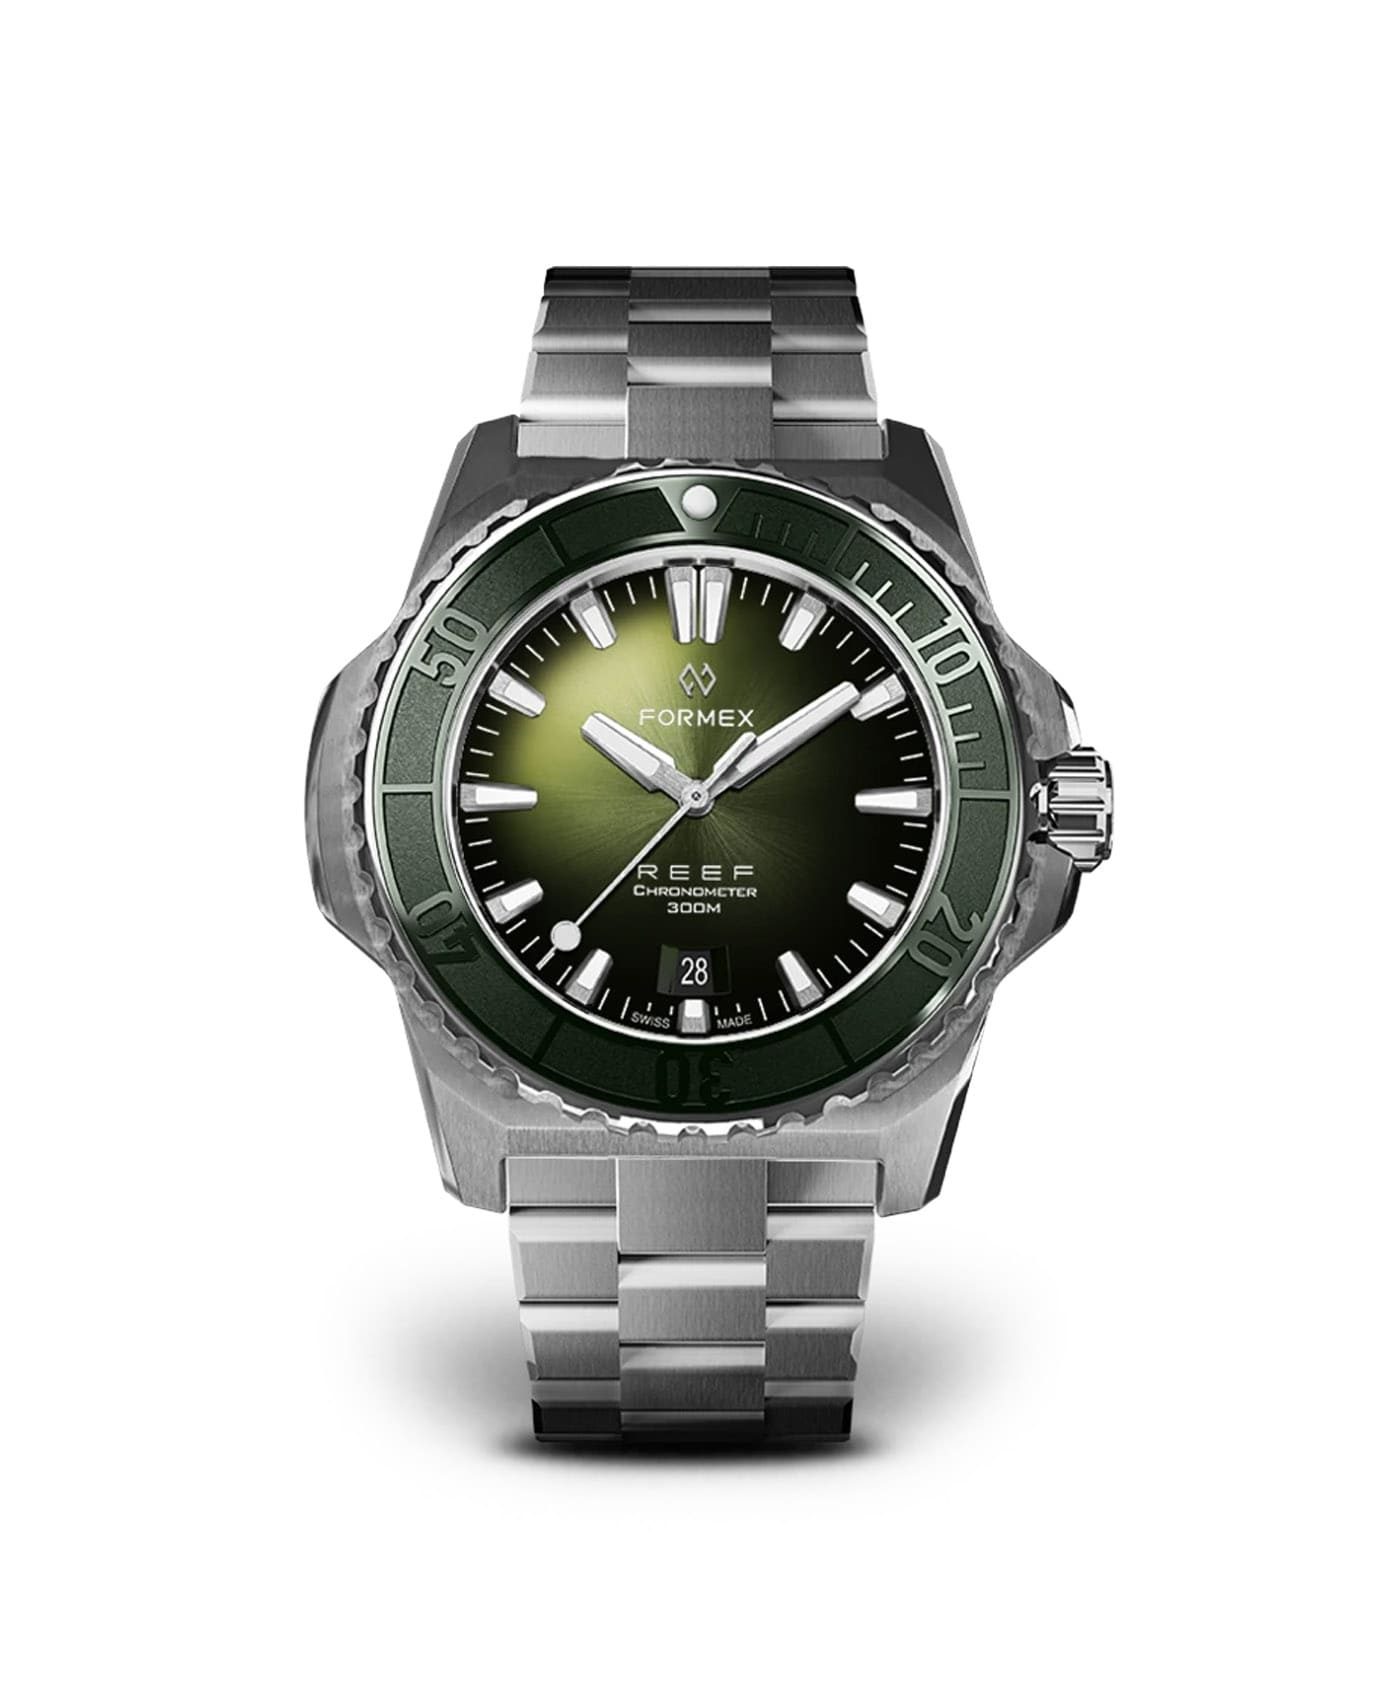 Formex - Reef - Automatic Chronometer COSC 300m_Green Dial Green Bezel